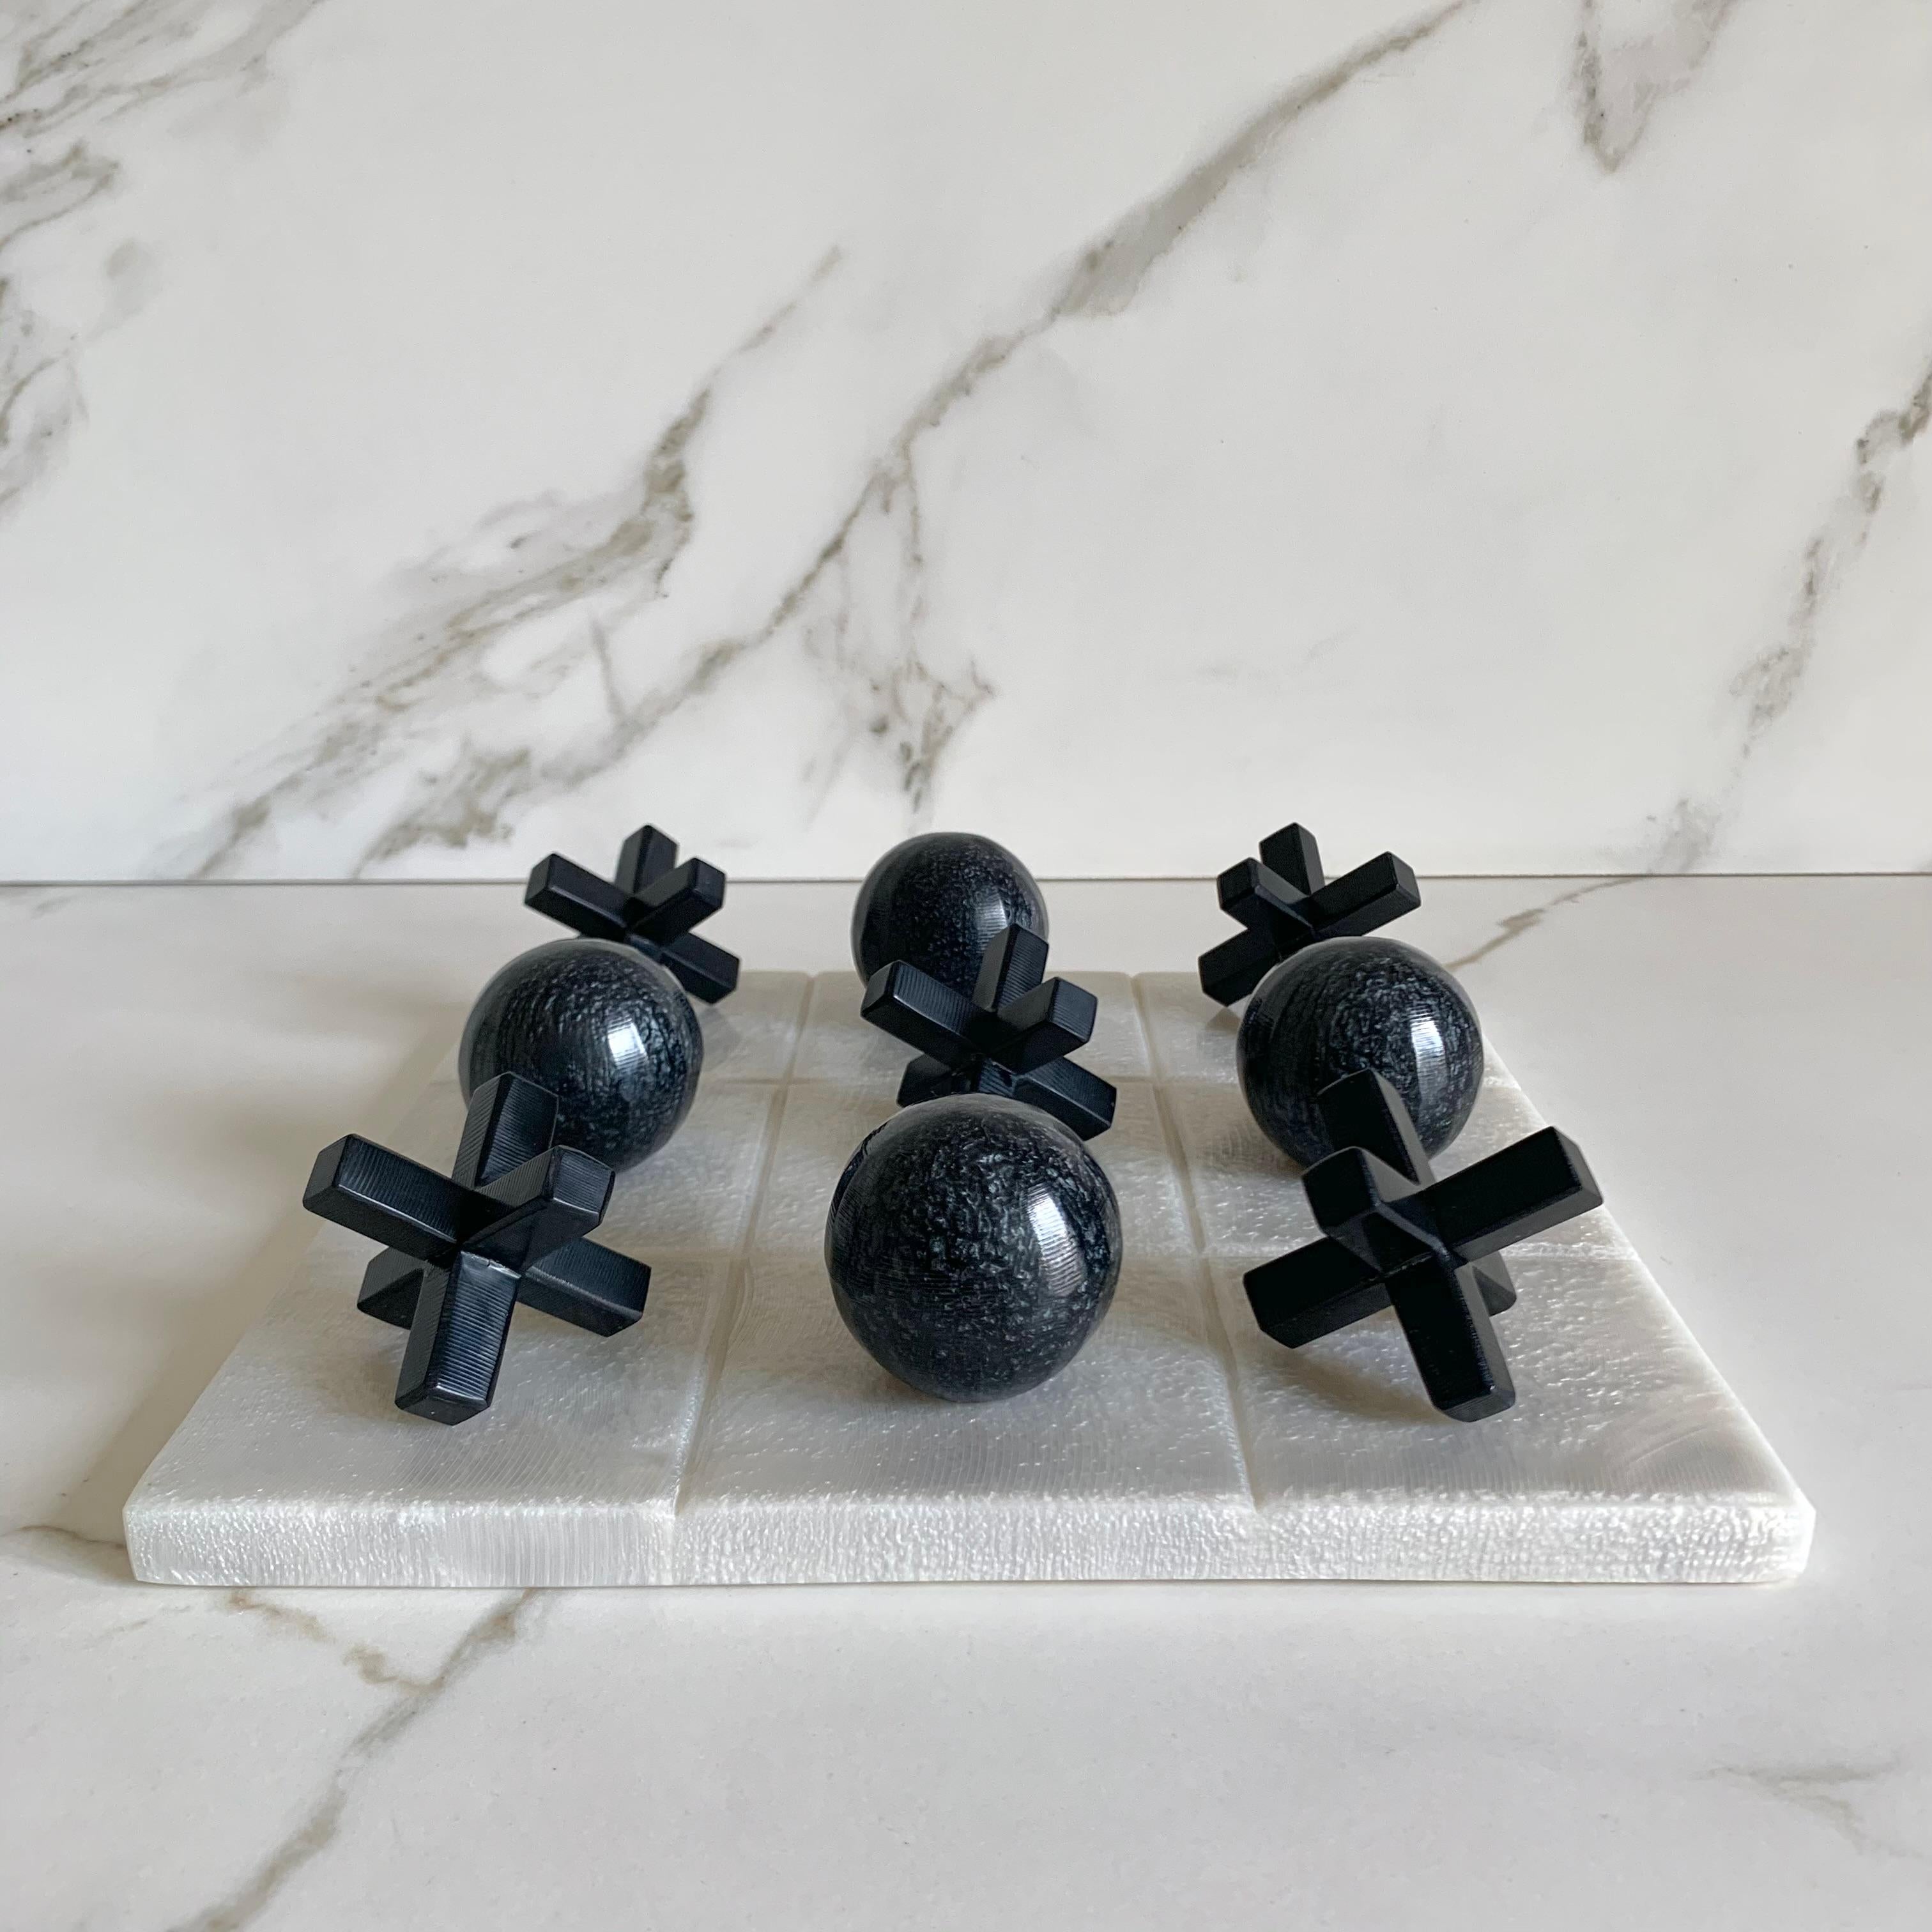 Our Tic Tac Toe is a beautiful, modern and fun take on the classic game. The three dimensional pieces are handmade in black pearl resin, and board is in white pearl resin. It will be the coolest statement piece on any coffee table.

Materials: